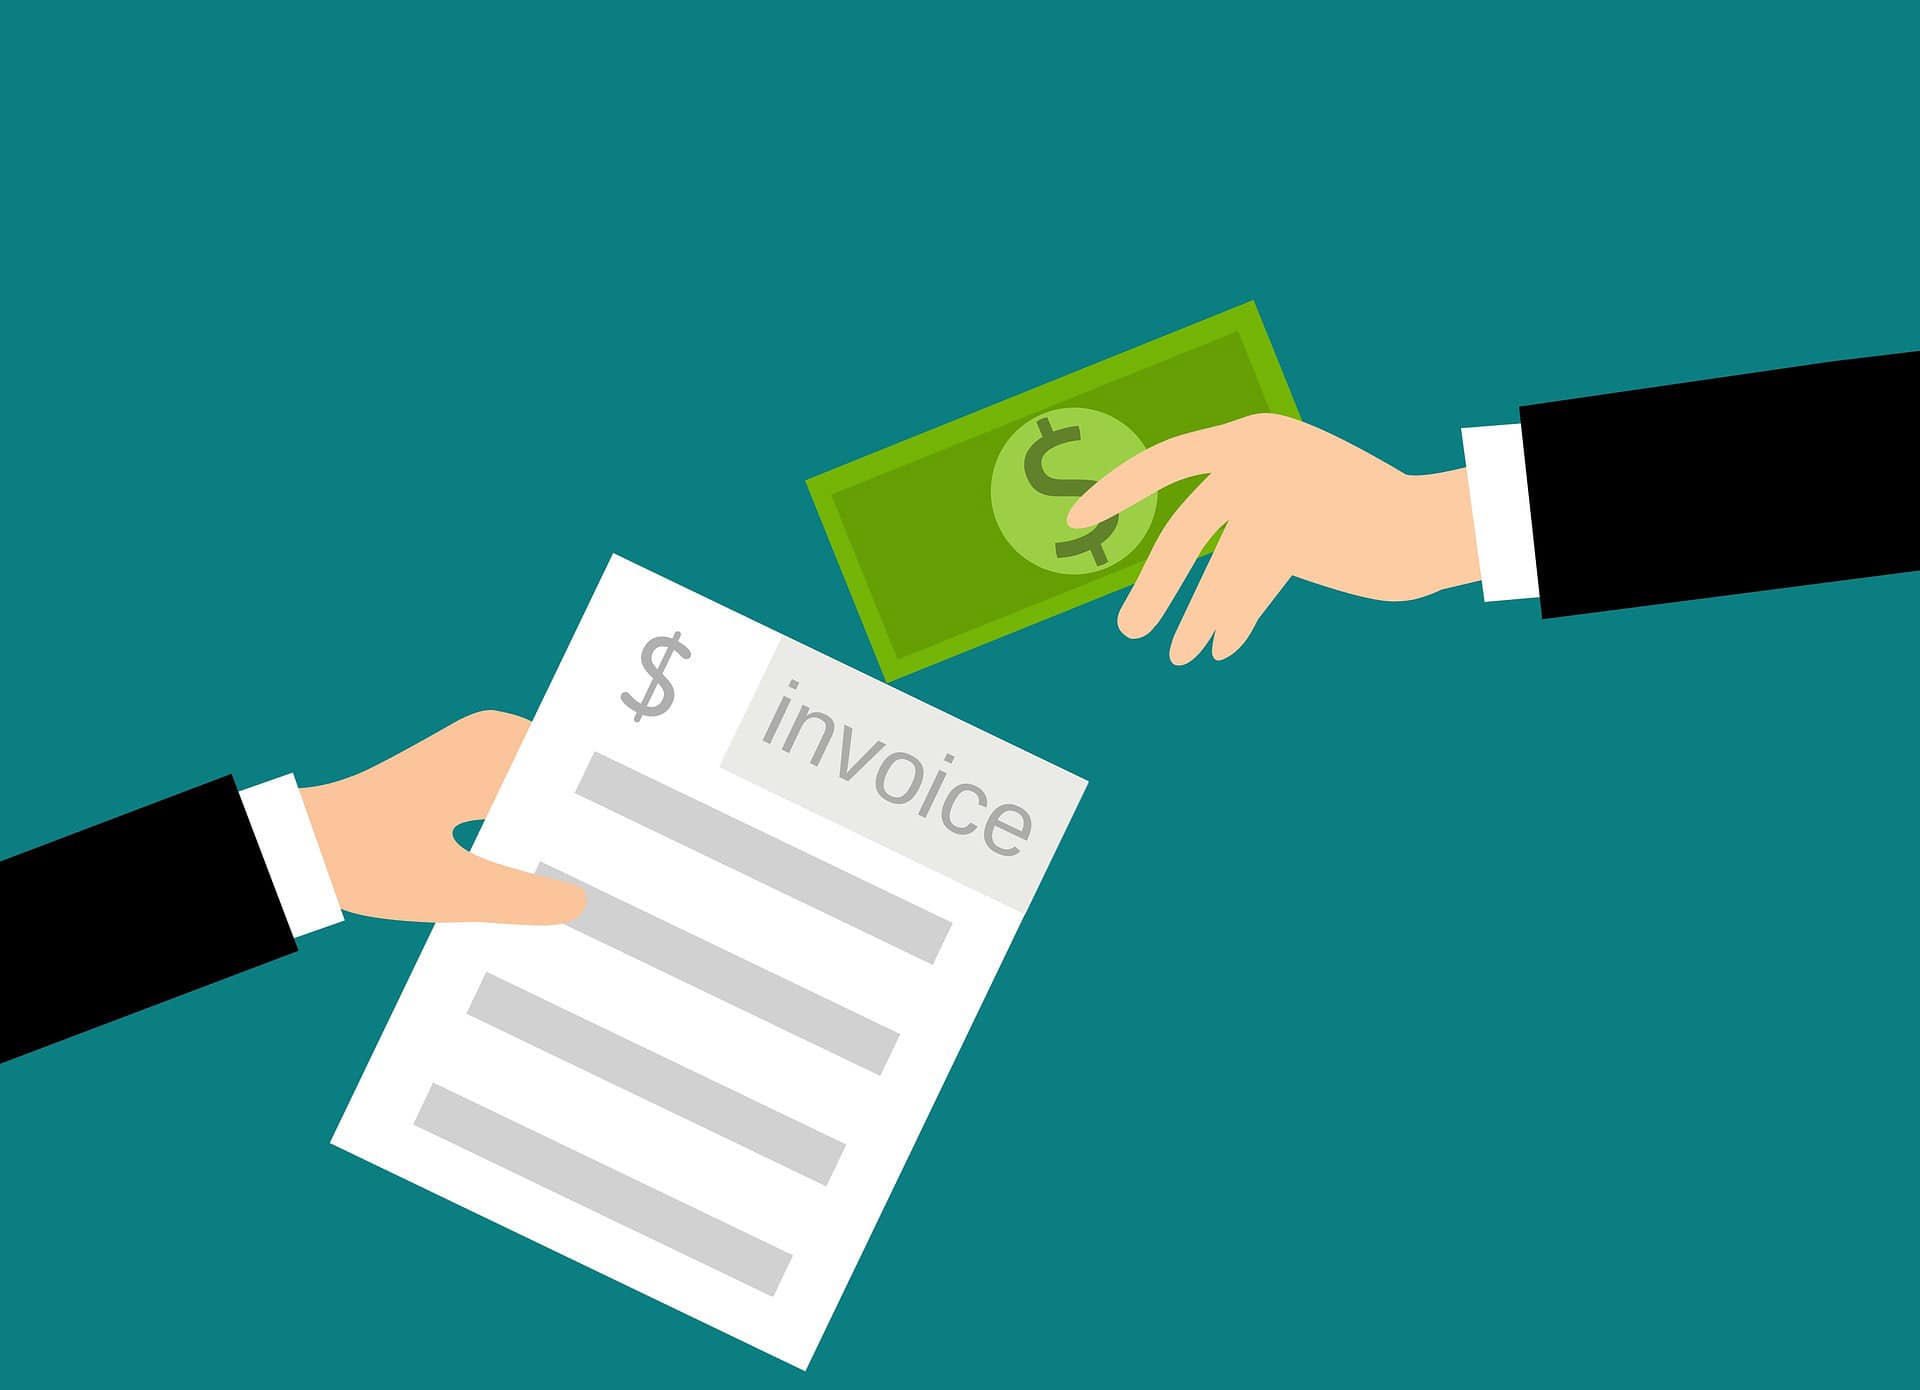 Proforma Invoice vs Commercial Invoice: What's the Difference?